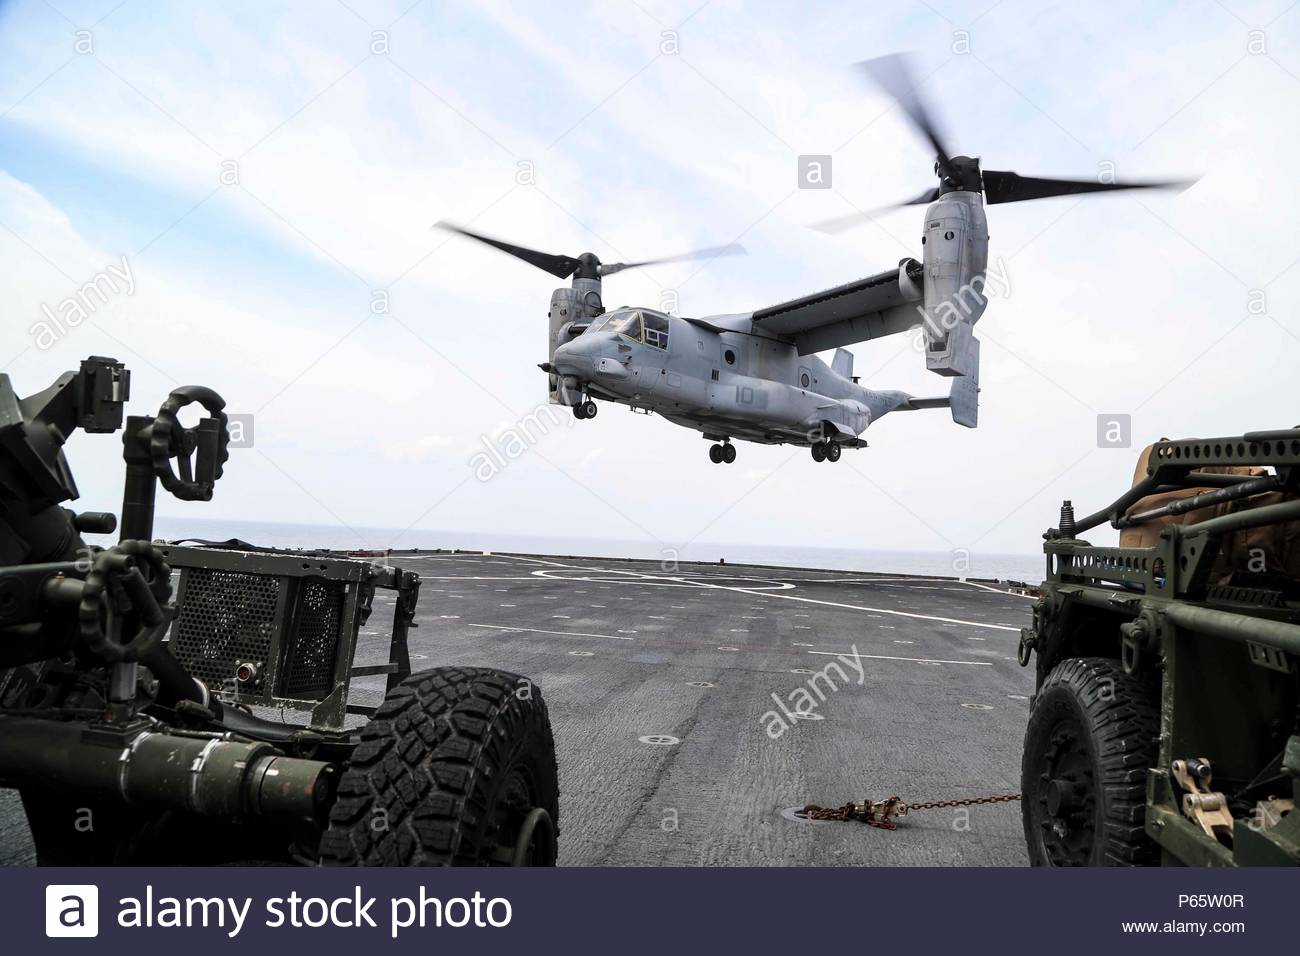 a-us-marine-corps-mv-22-osprey-lands-on-the-uss-whidbey-island-lsd-41-may-5-2016-the-vehicles-were-loaded-to-support-a-theater-security-cooperation-event-as-a-part-of-a-meu-readiness-exercise-us-marine-corps-photo-by-lance-cpl-koby-i-saunders22-marine-expeditionary-unit-released-P65W0R.jpg